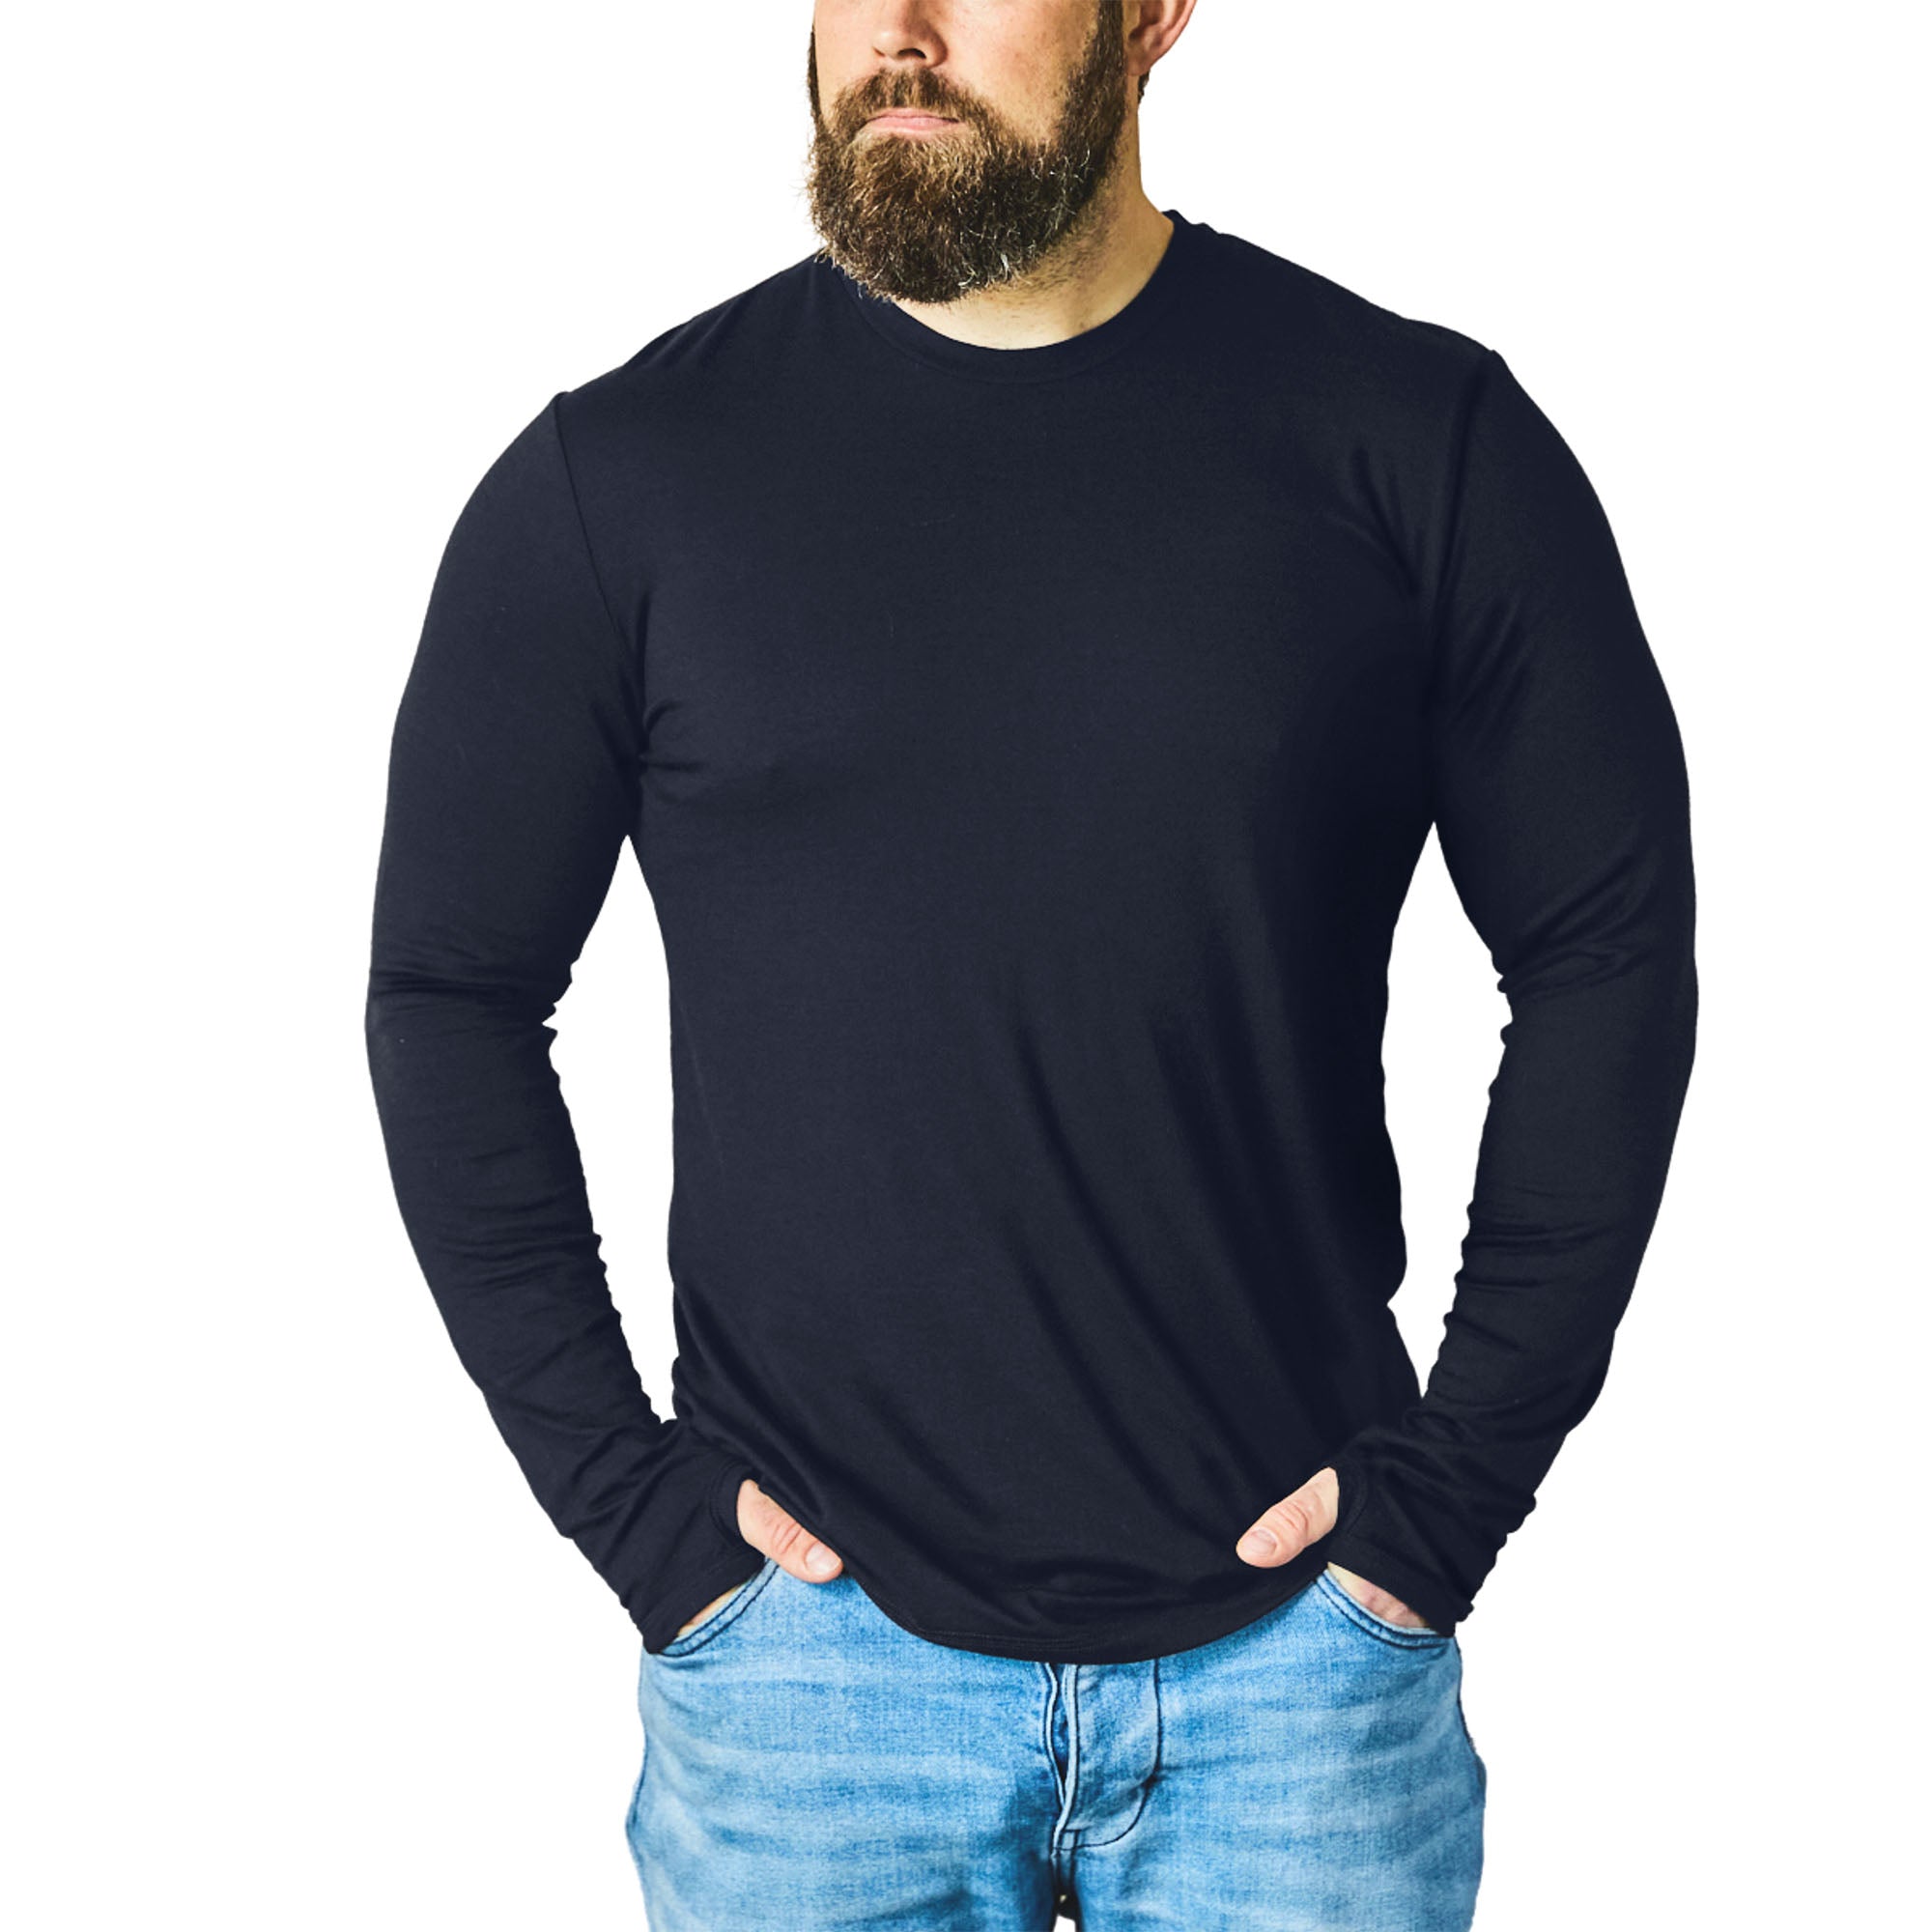 Merino 365 OG Long Sleeve with Thumbloops Top, Navy Blue